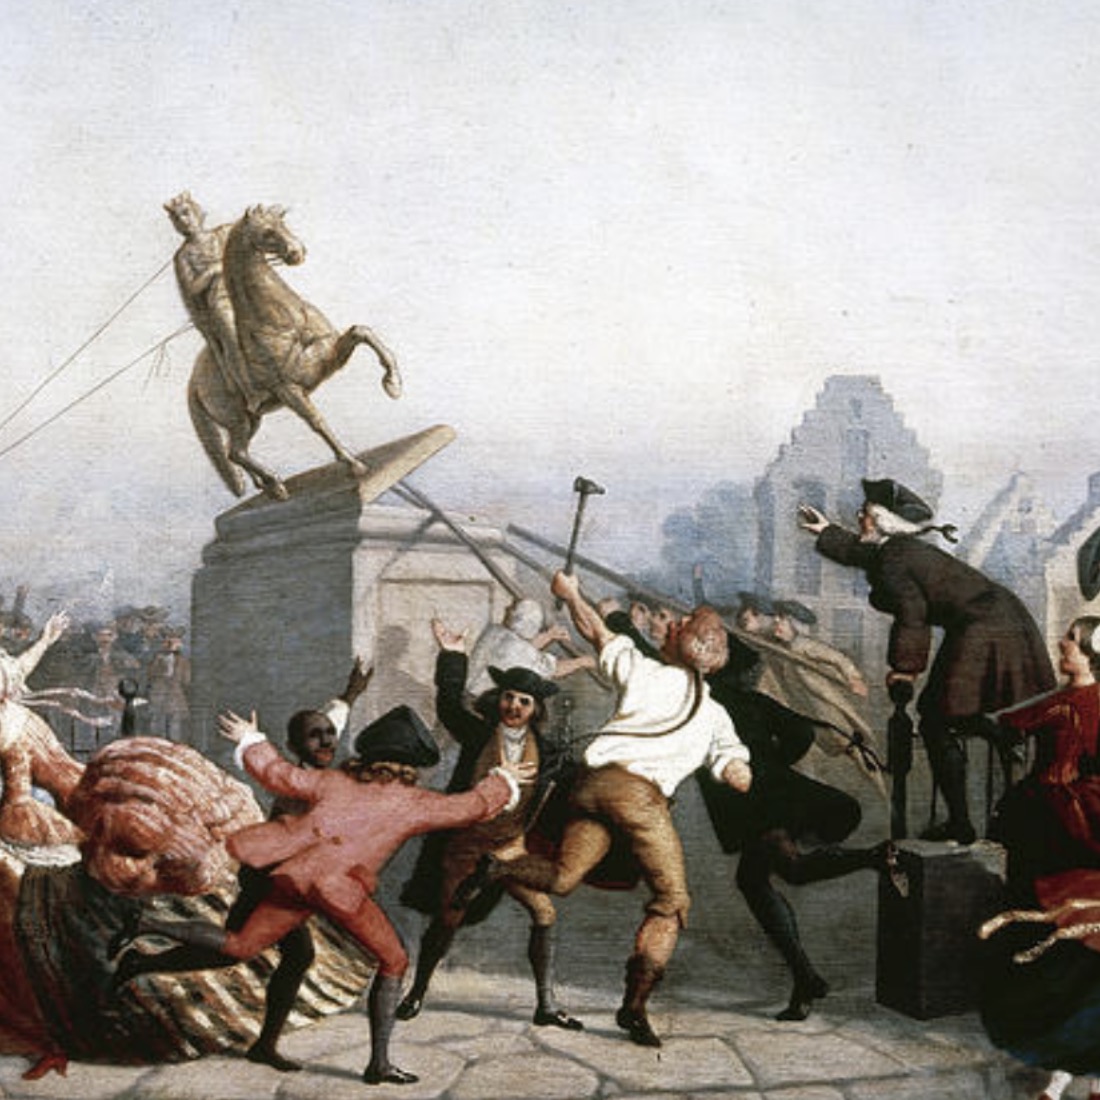 This 1850s painting of the destruction of the statue of George III in New York reflects the antimonarchical radicalism of the American Revolution.